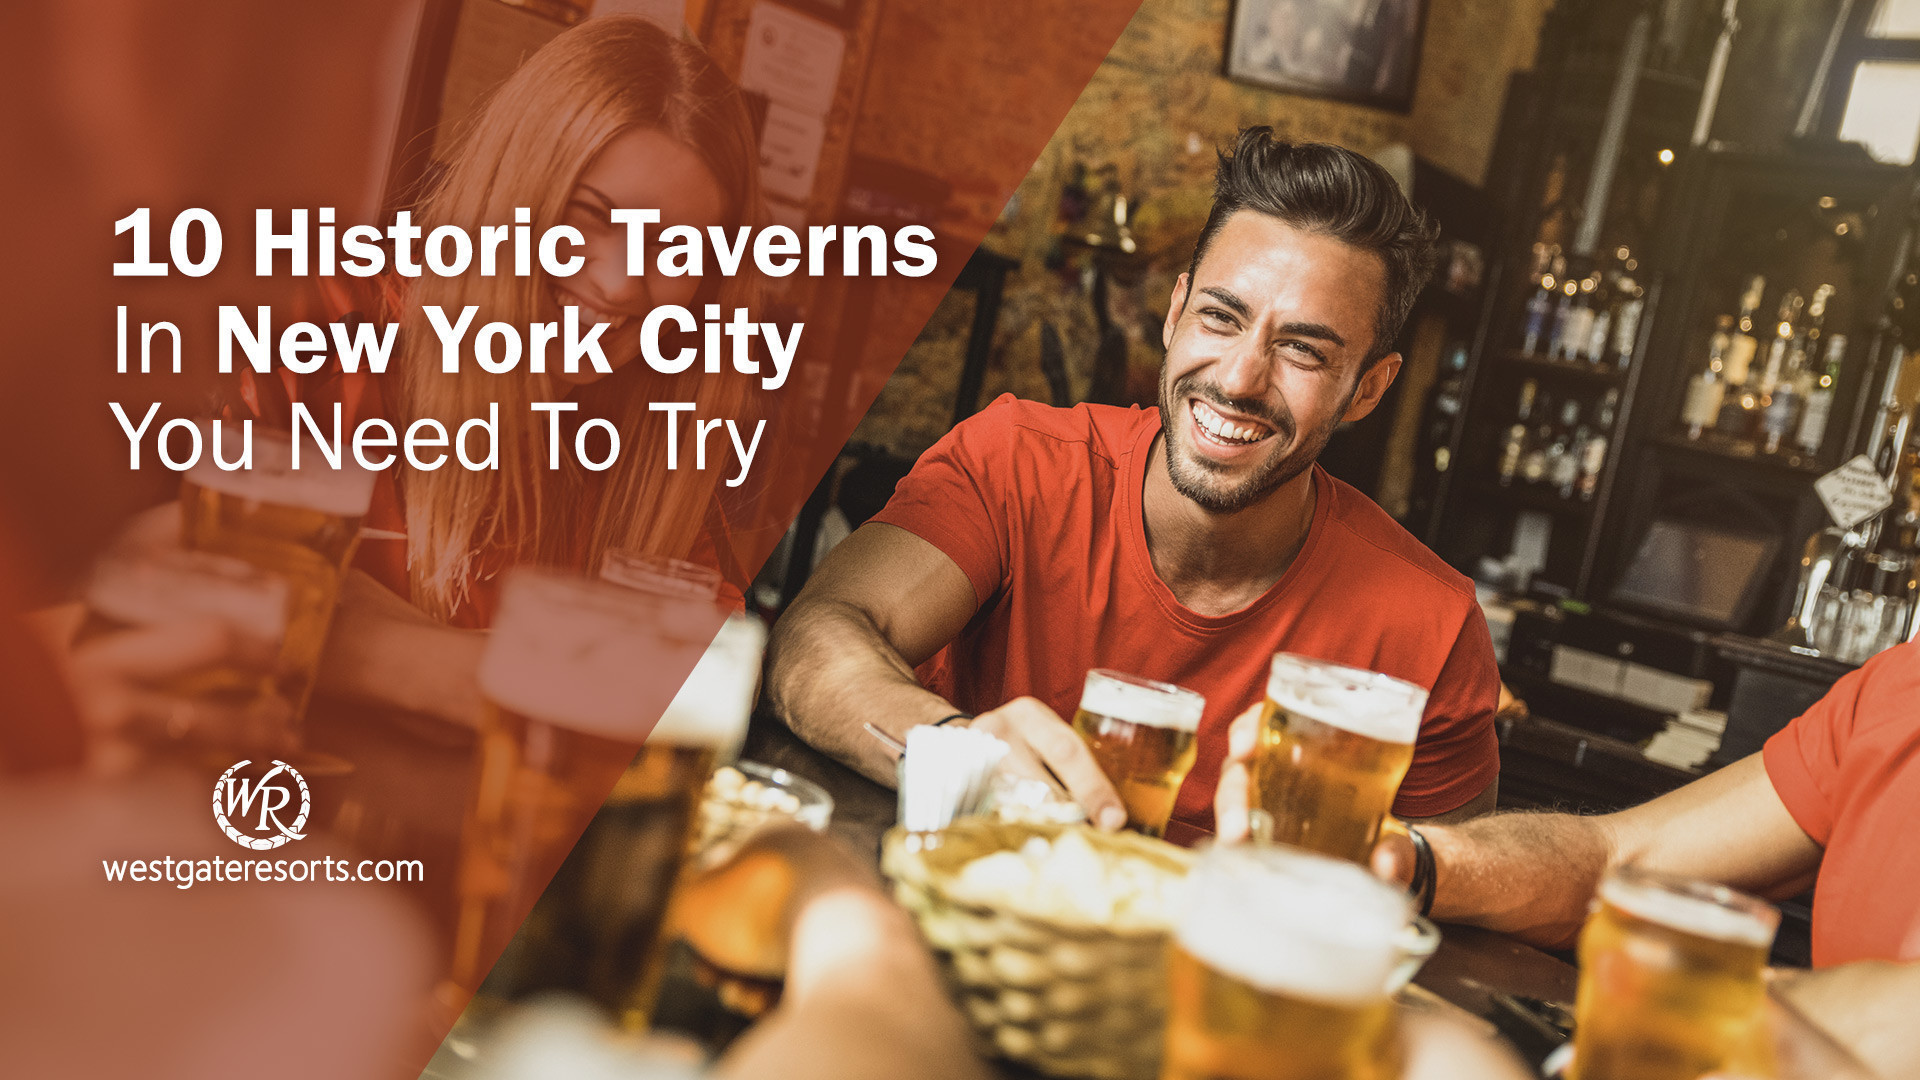 10 Historic Taverns In New York City You Need To Try | The Best Old NYC Taverns